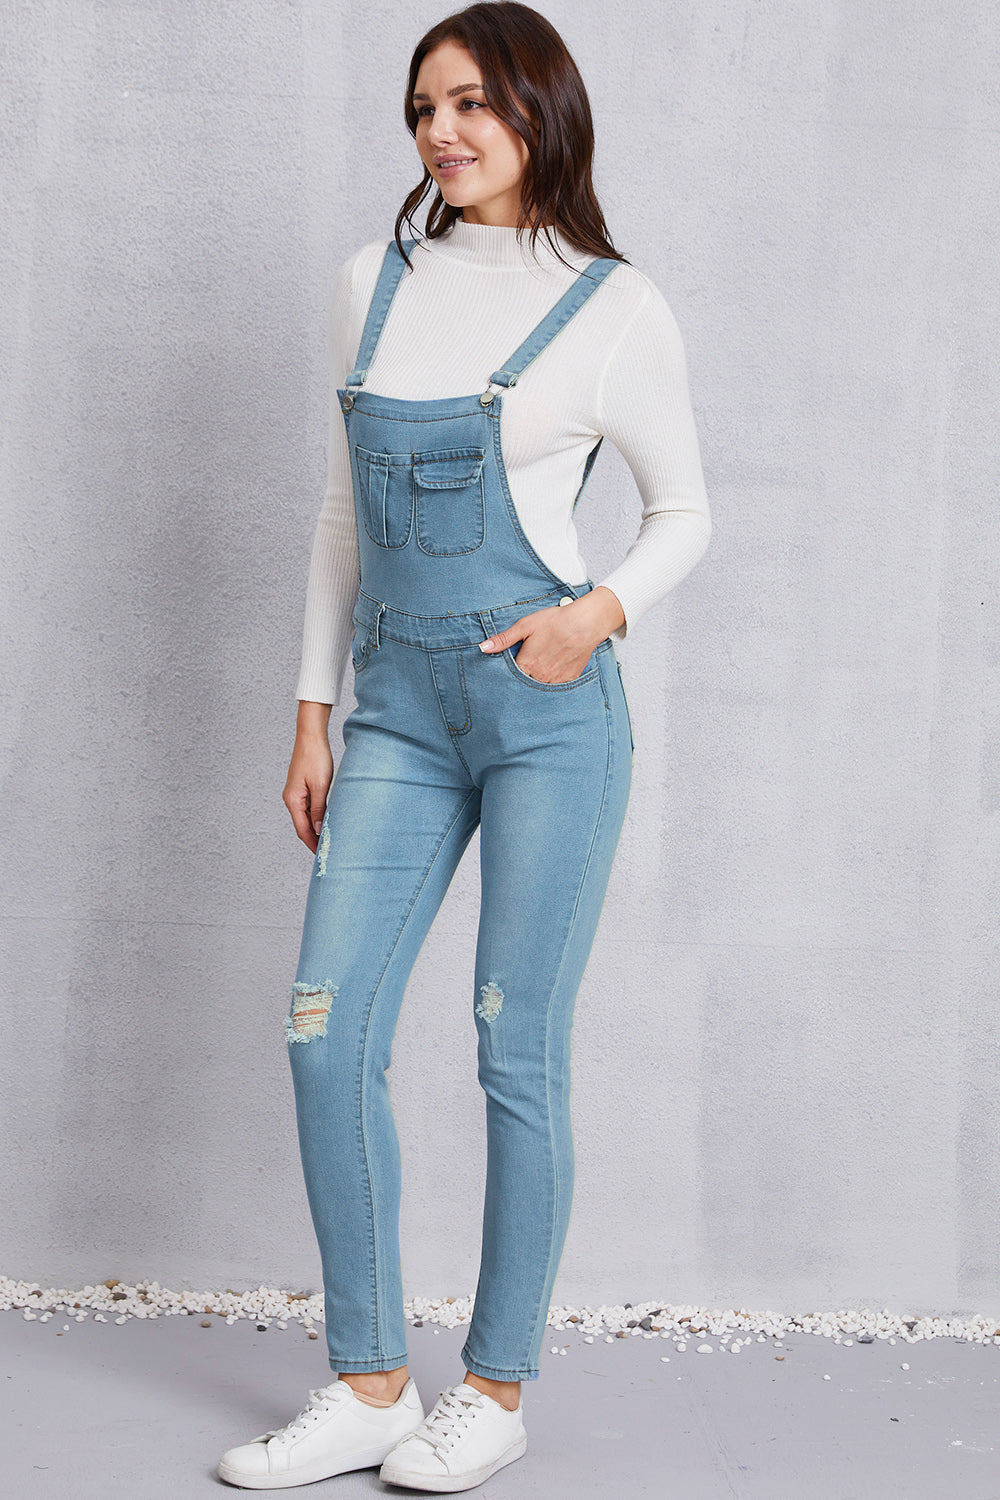 Distressed Washed Denim Overalls with Pockets Bottom wear